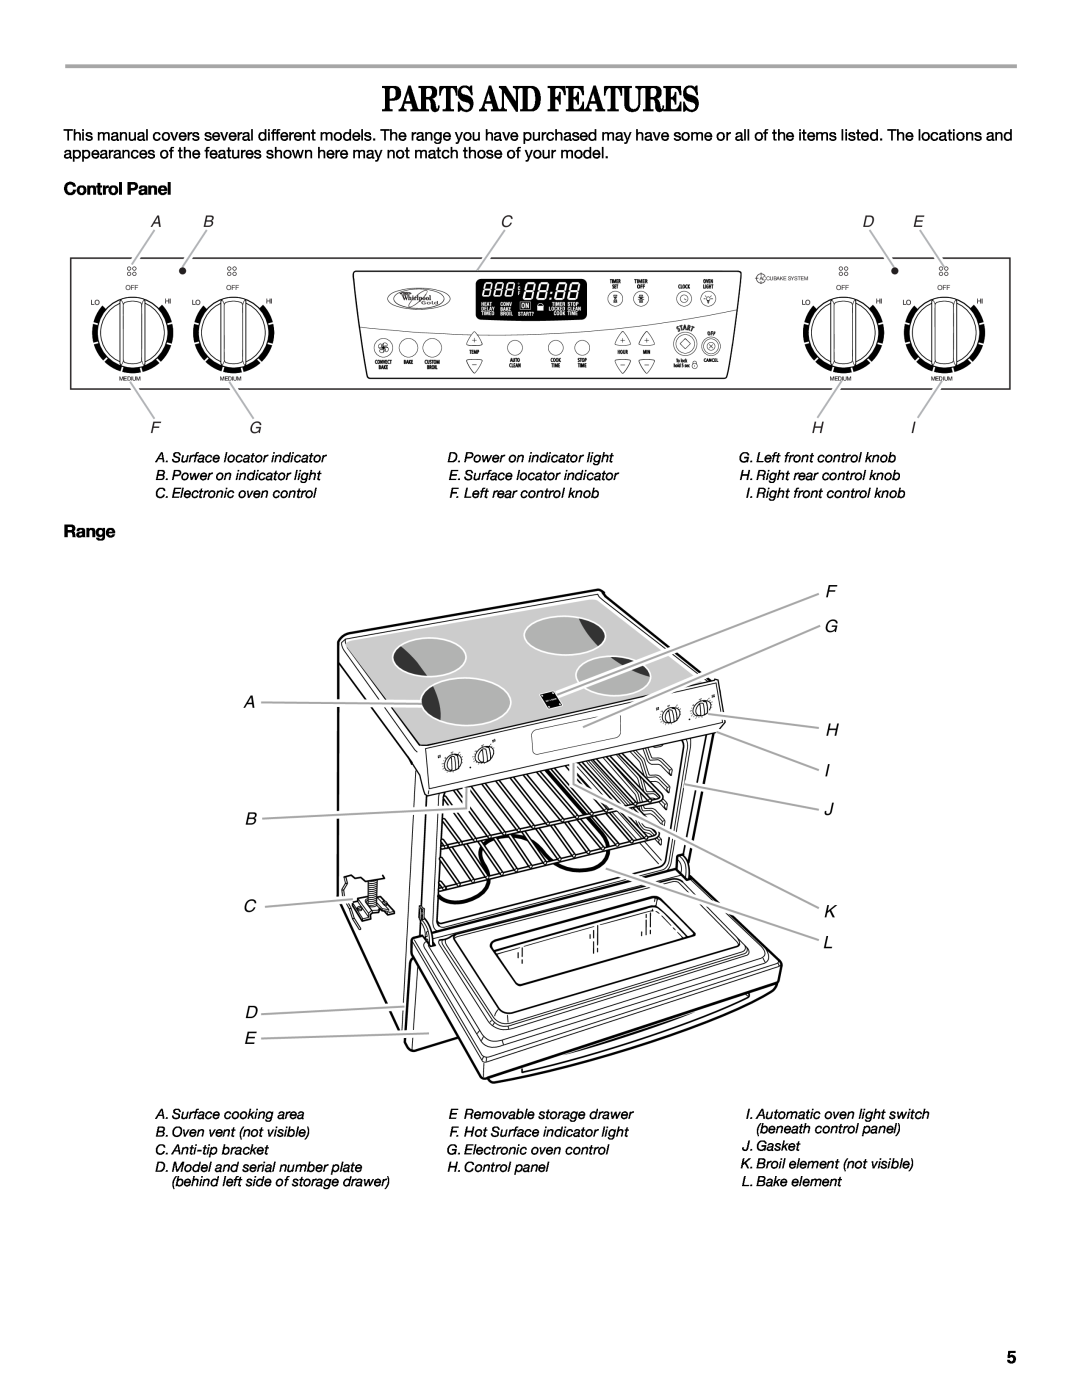 Whirlpool Ranges manual Parts And Features, Control Panel, A B C D E, F G H I J K L 